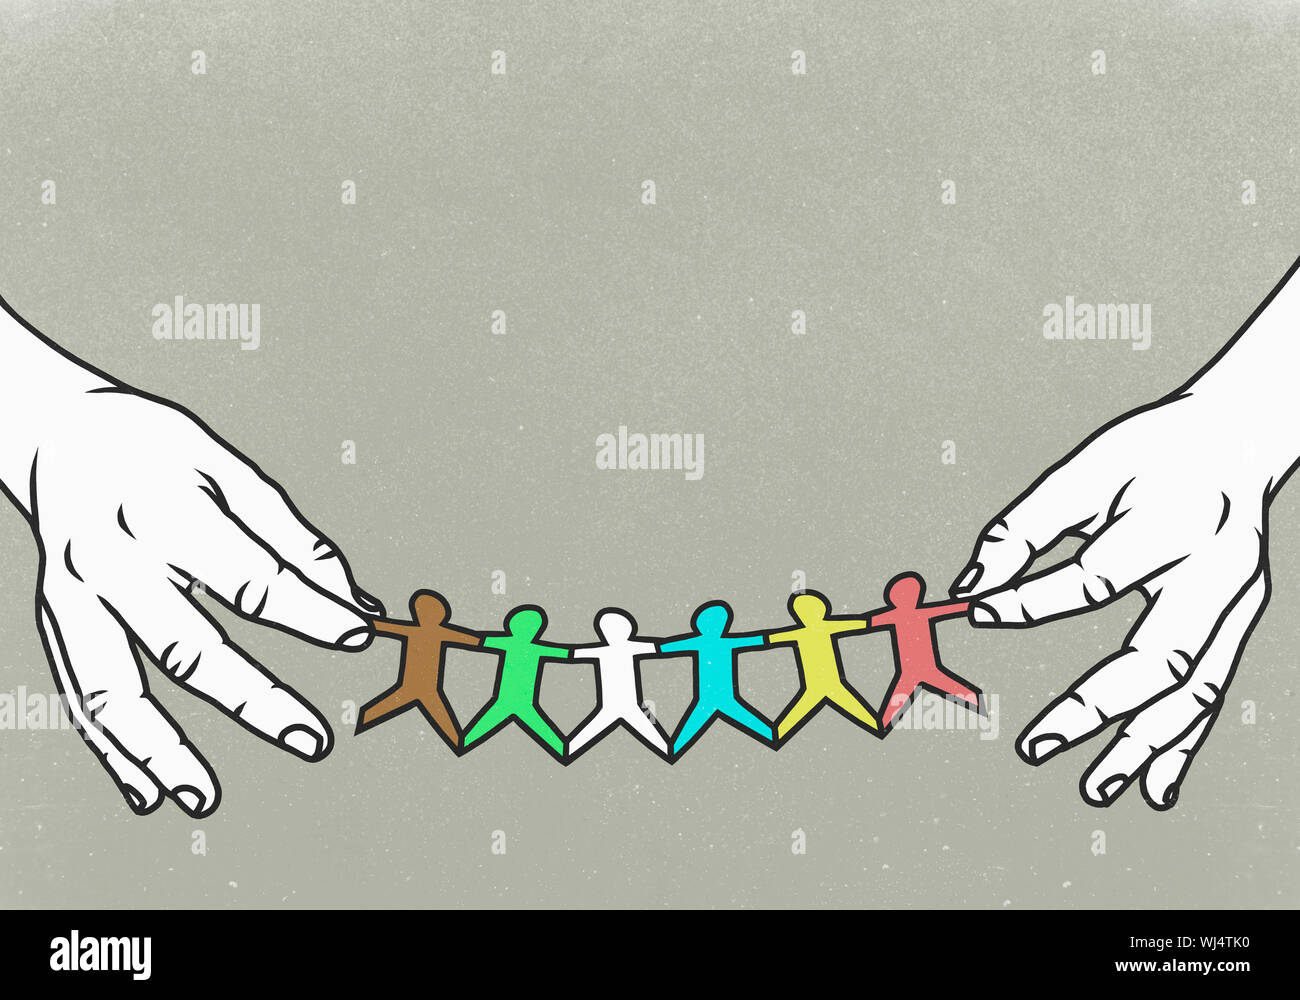 Hands holding multi colored paper chain Banque D'Images